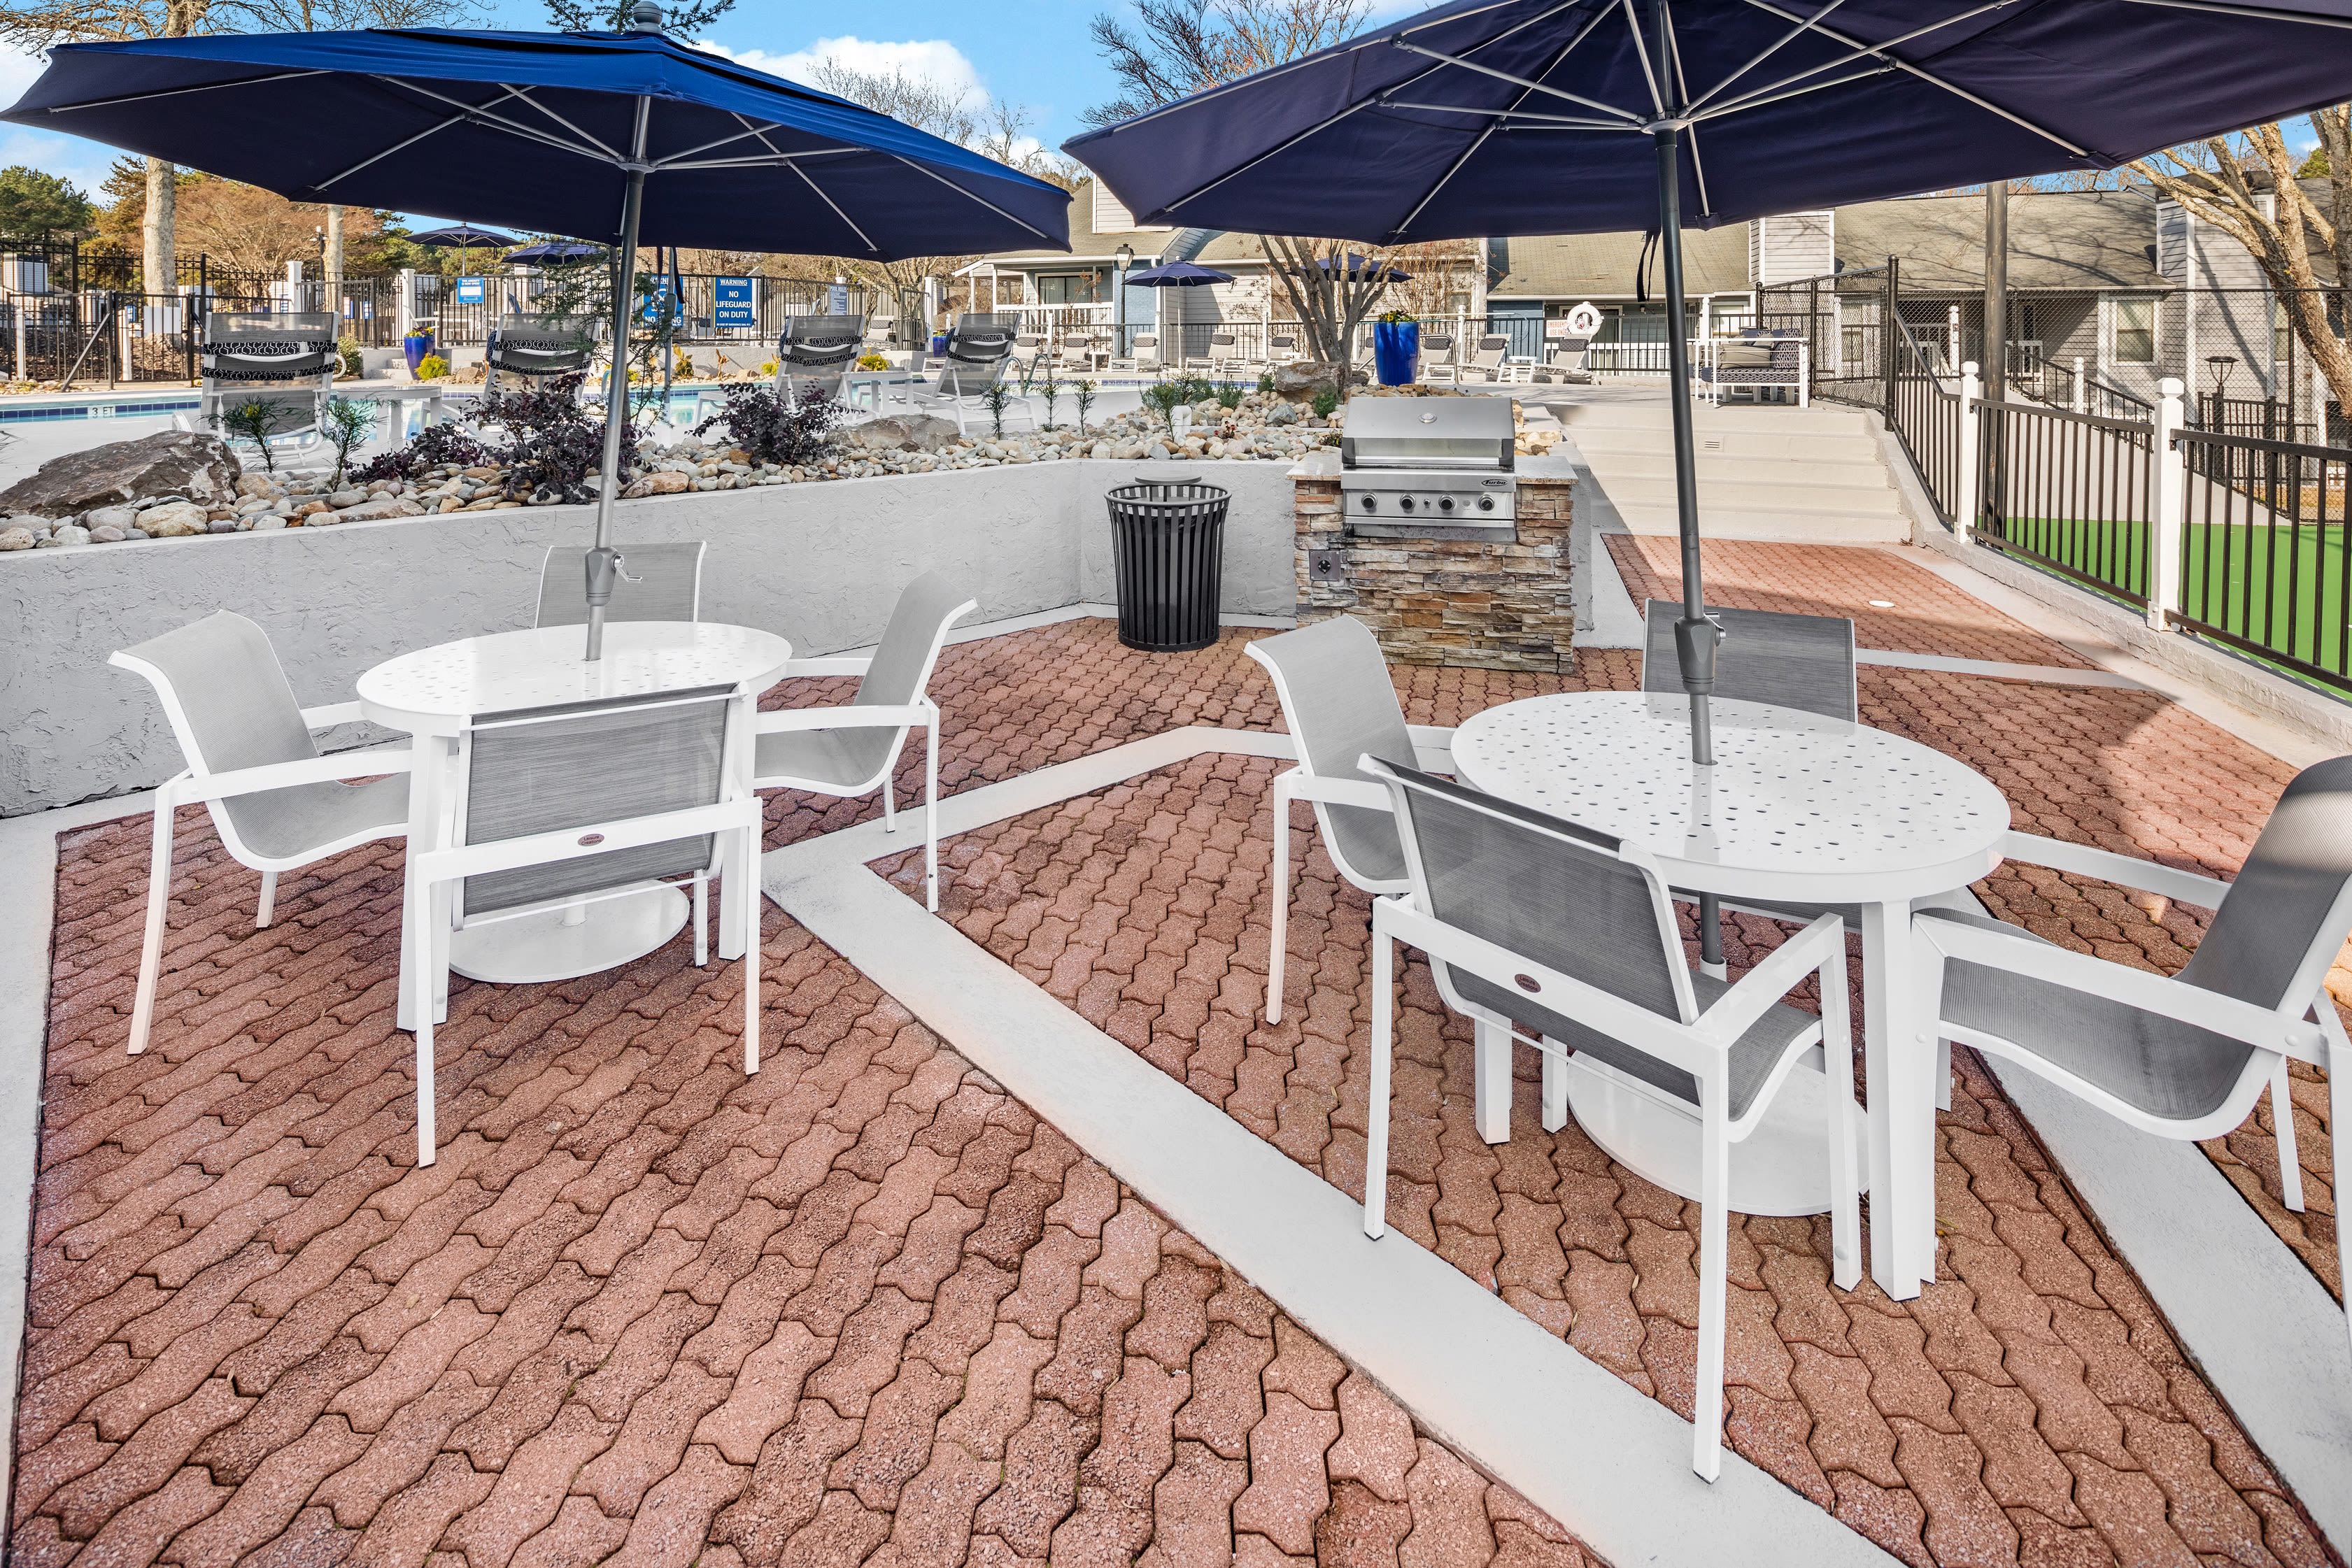 An outdoor seating area with tables and umbrellas at The Everette at East Cobb in Marietta, Georgia